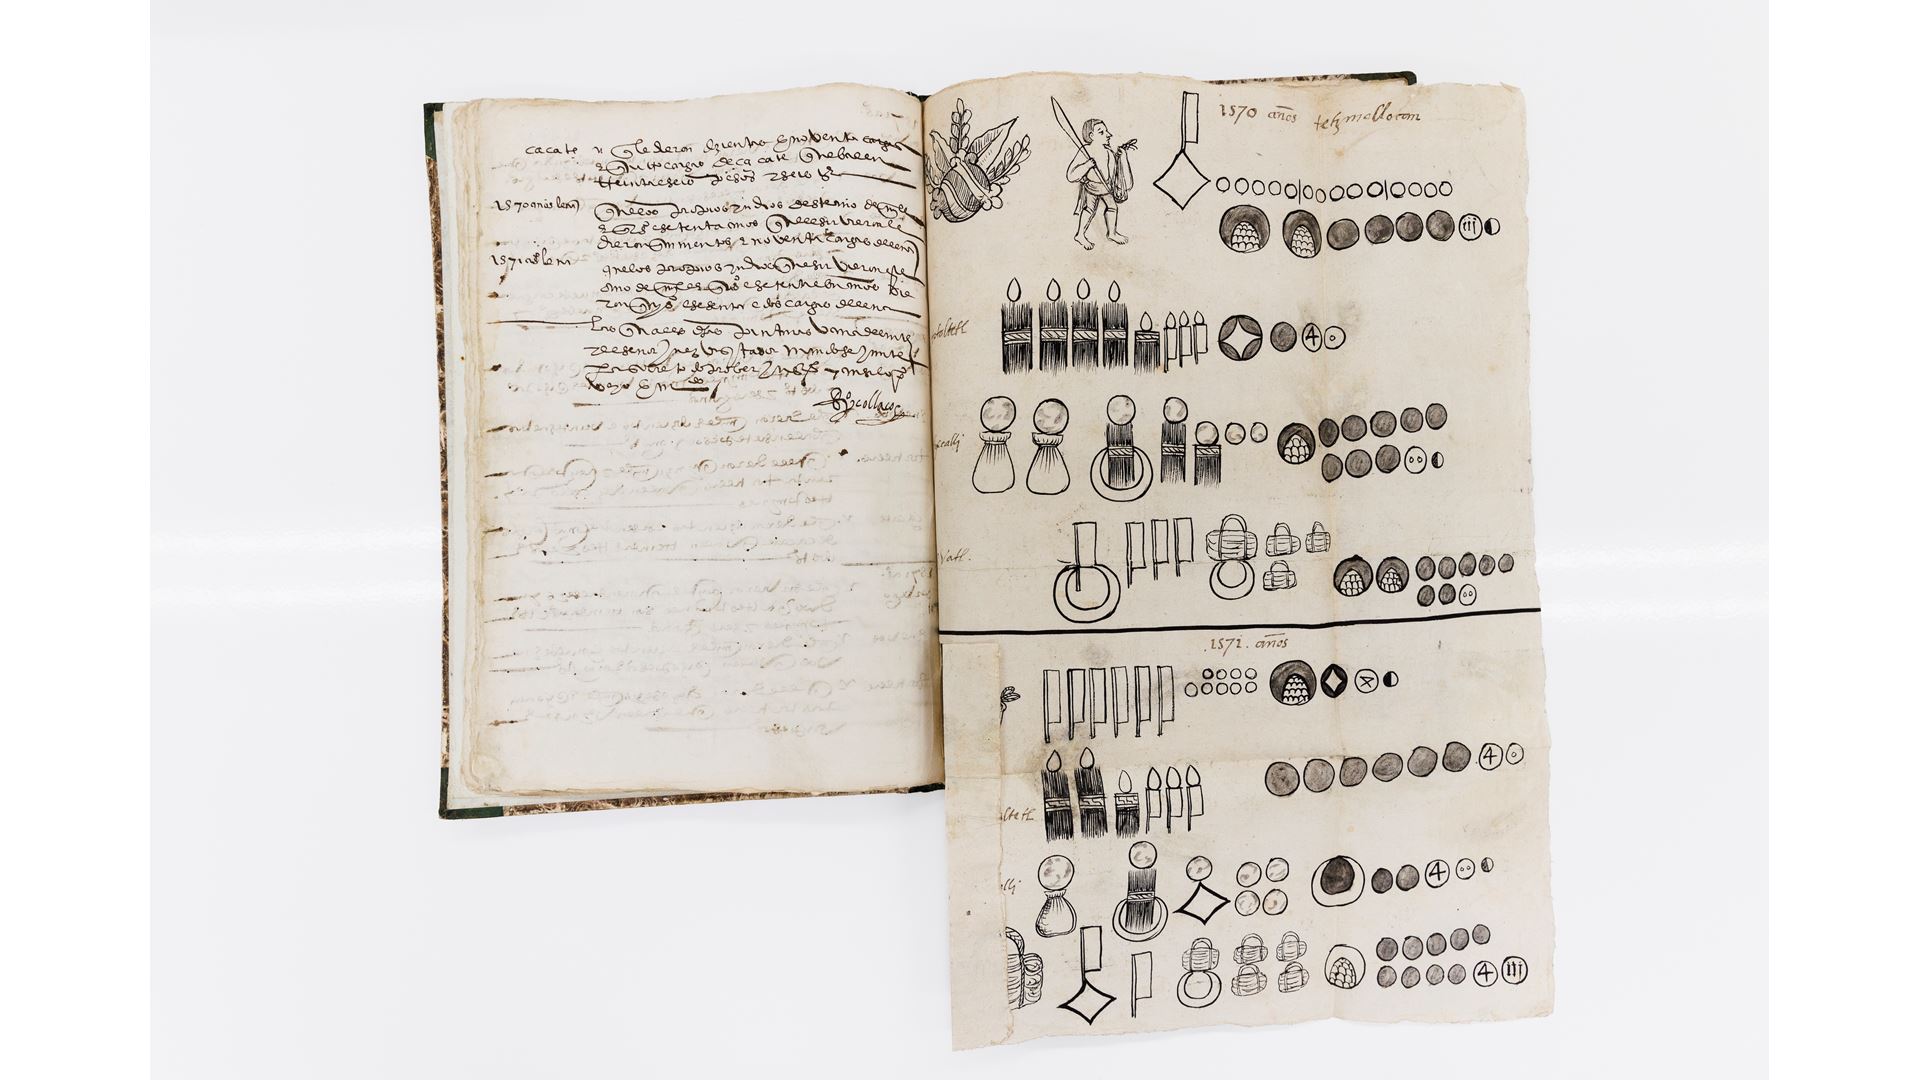 Library of Congress Acquires Rare Codex from Central Mexico